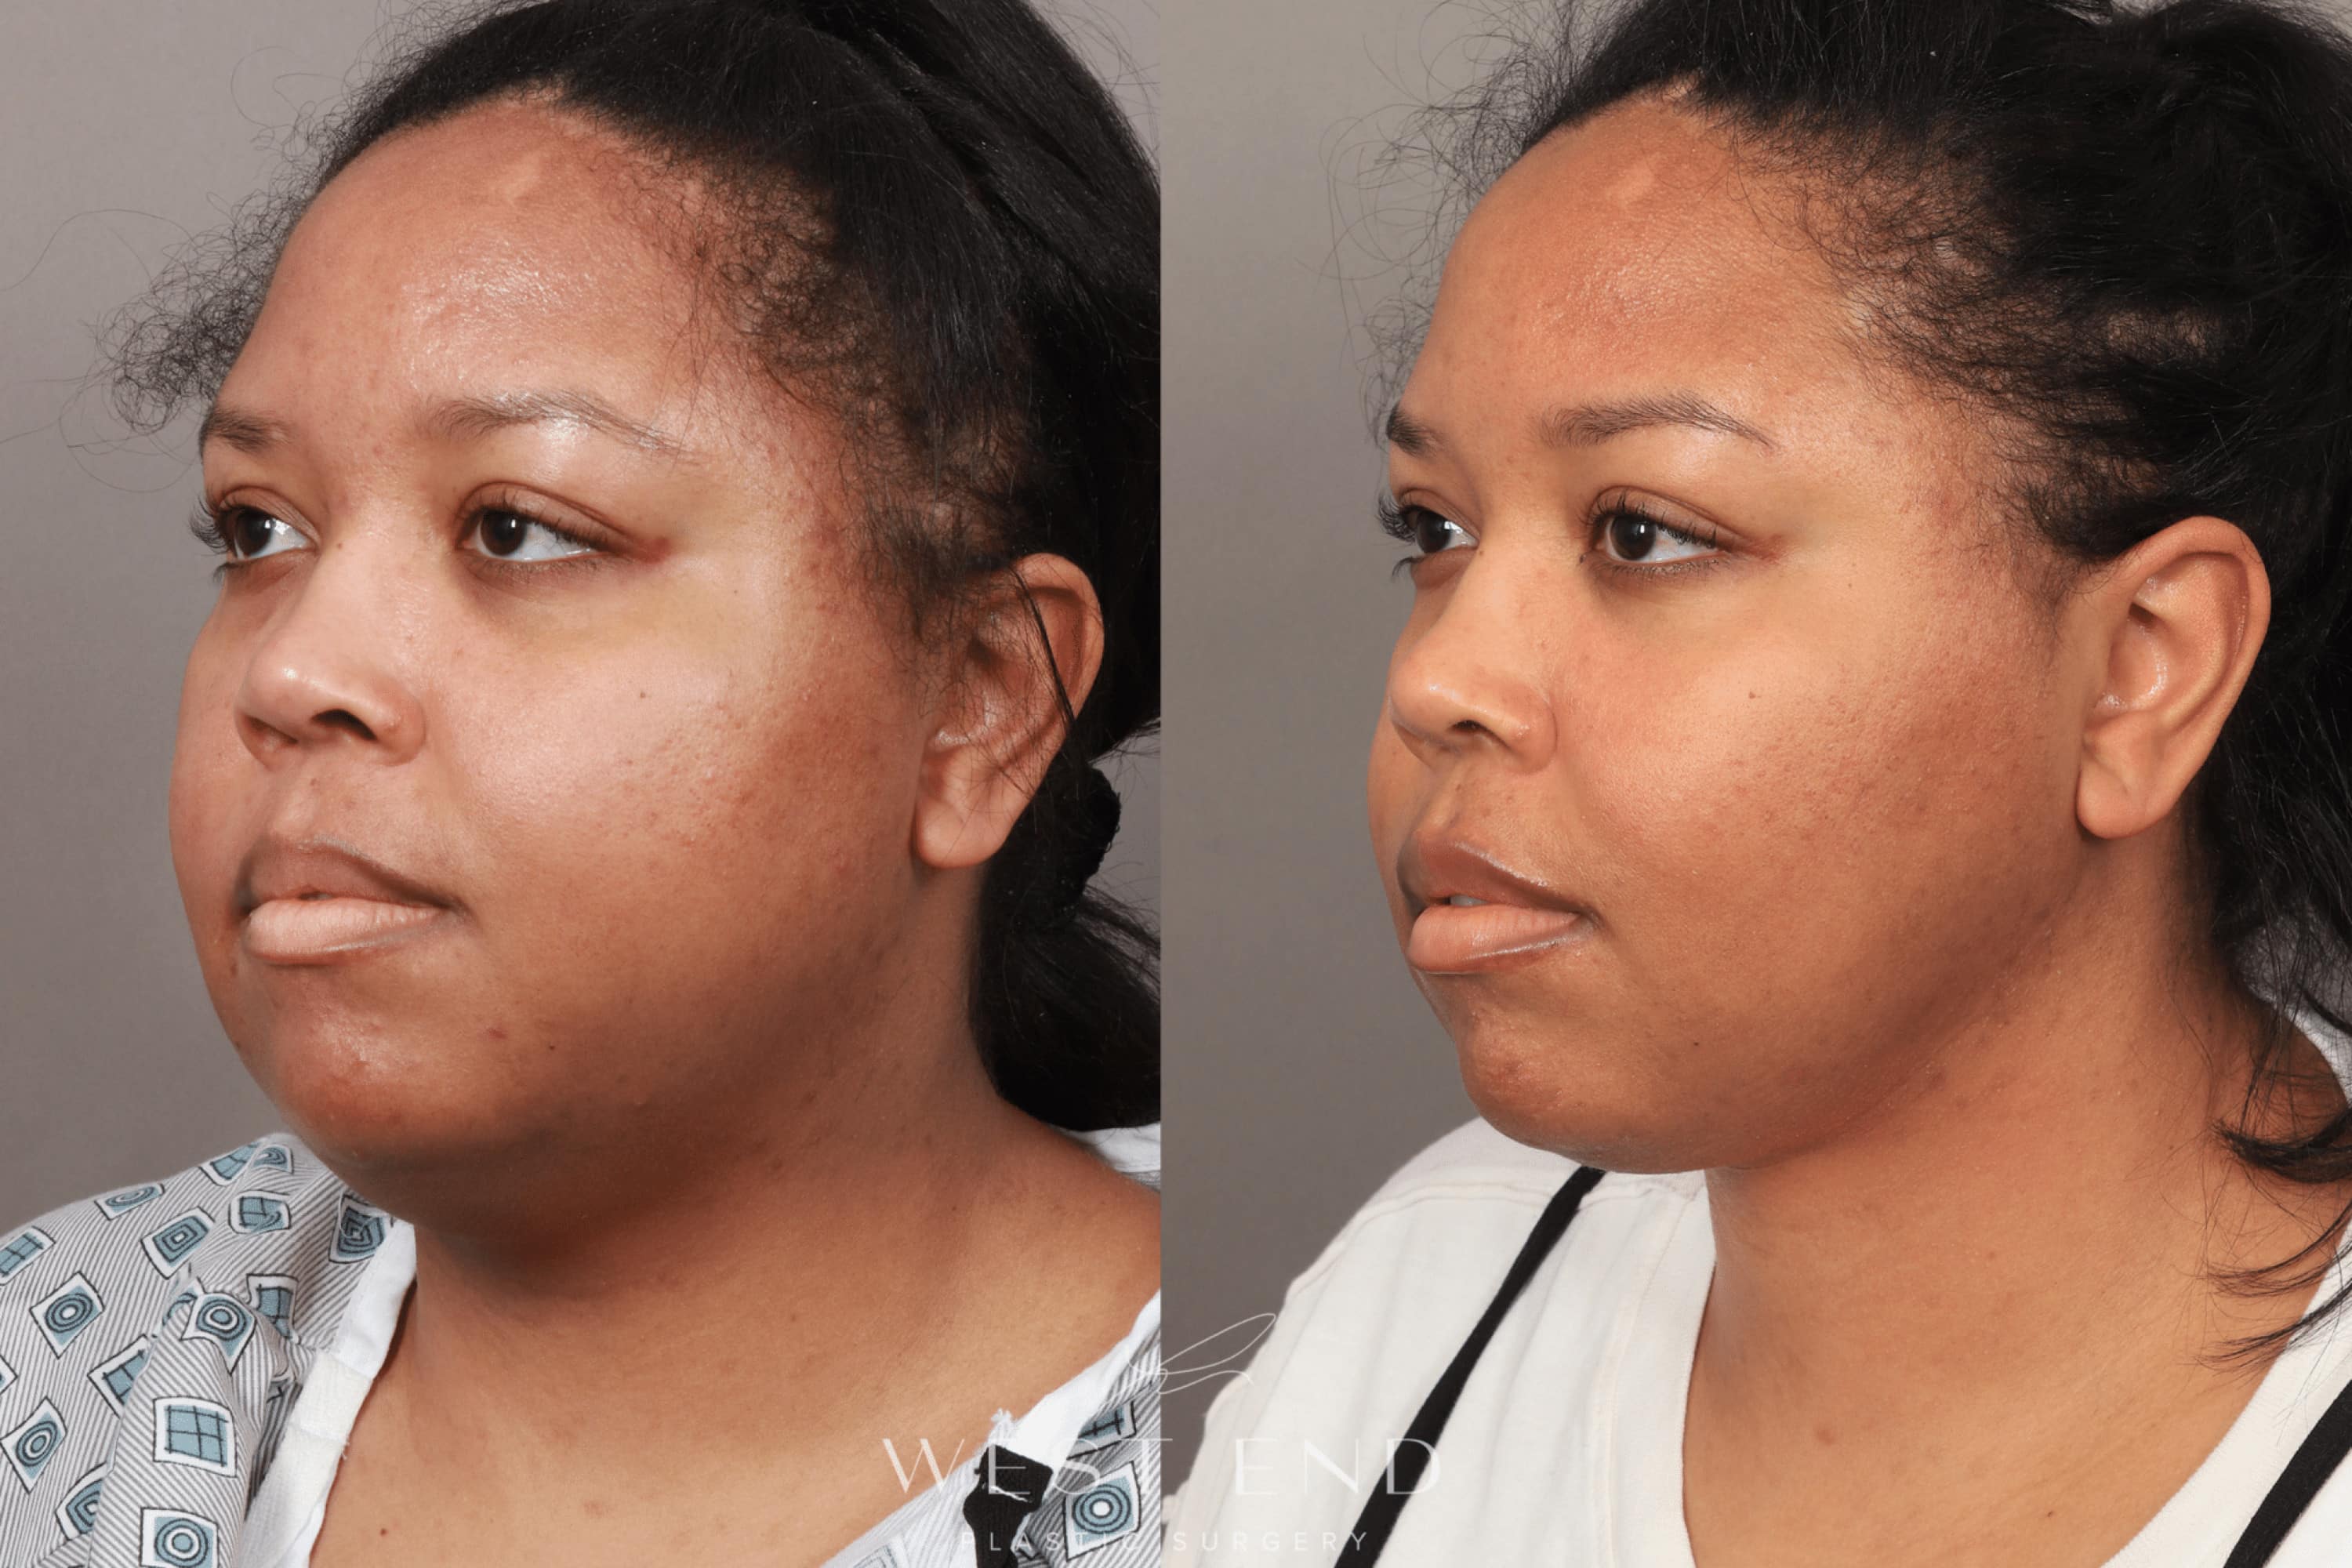 Buccal Fat Removal, Liposuction, and Renuvion Skin Tightening (1 Month Post-op)